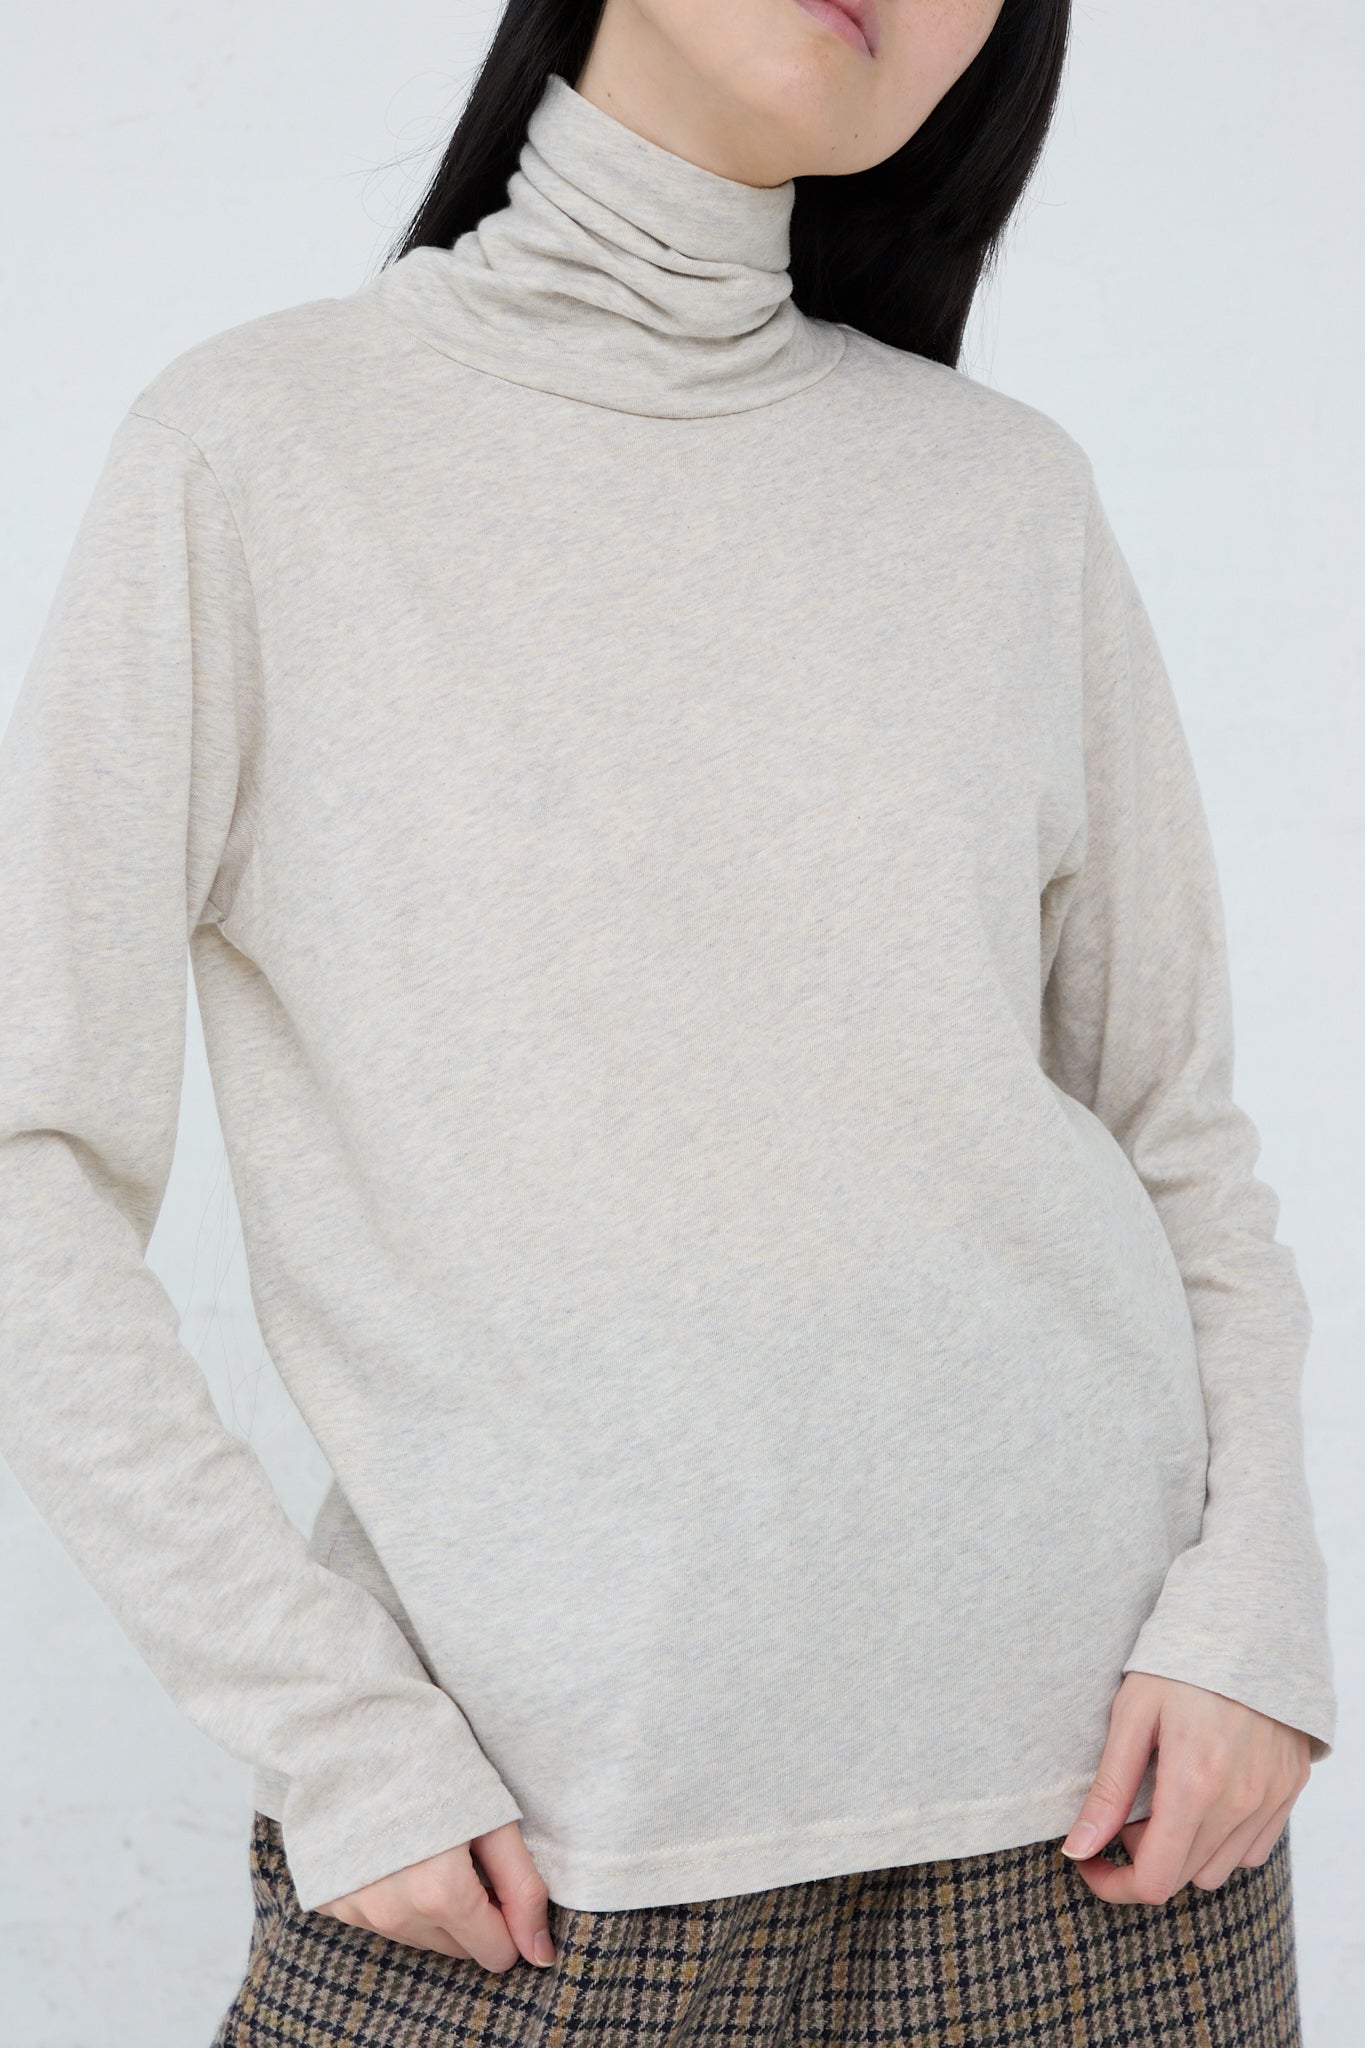 The model is wearing a relaxed fit, beige Cotton Knit Turtleneck in Oatmeal t - shirt made of Ichi.